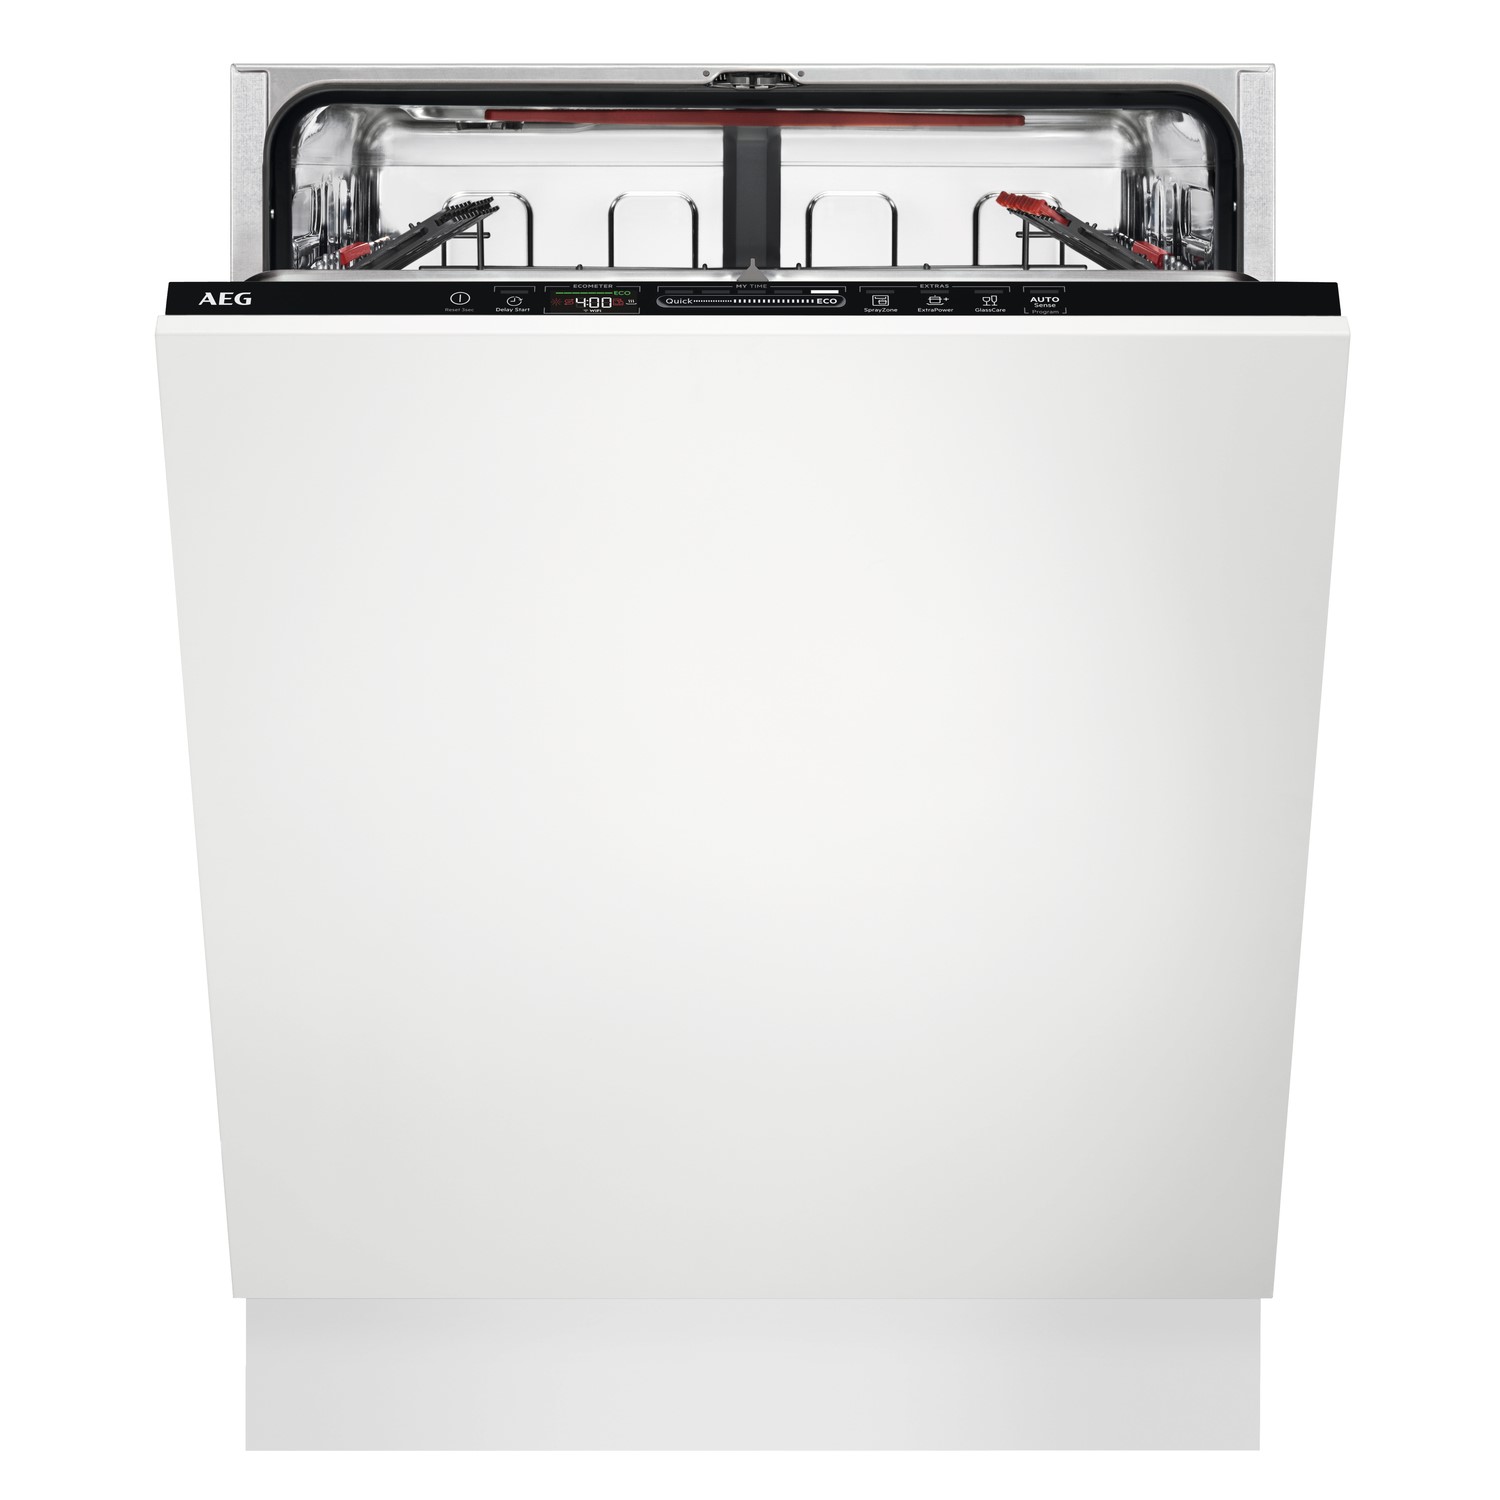 AEG FSS63607P Fully Integrated Standard Dishwasher - Black Control Panel with Sliding Door Fixing Kit - D Rated